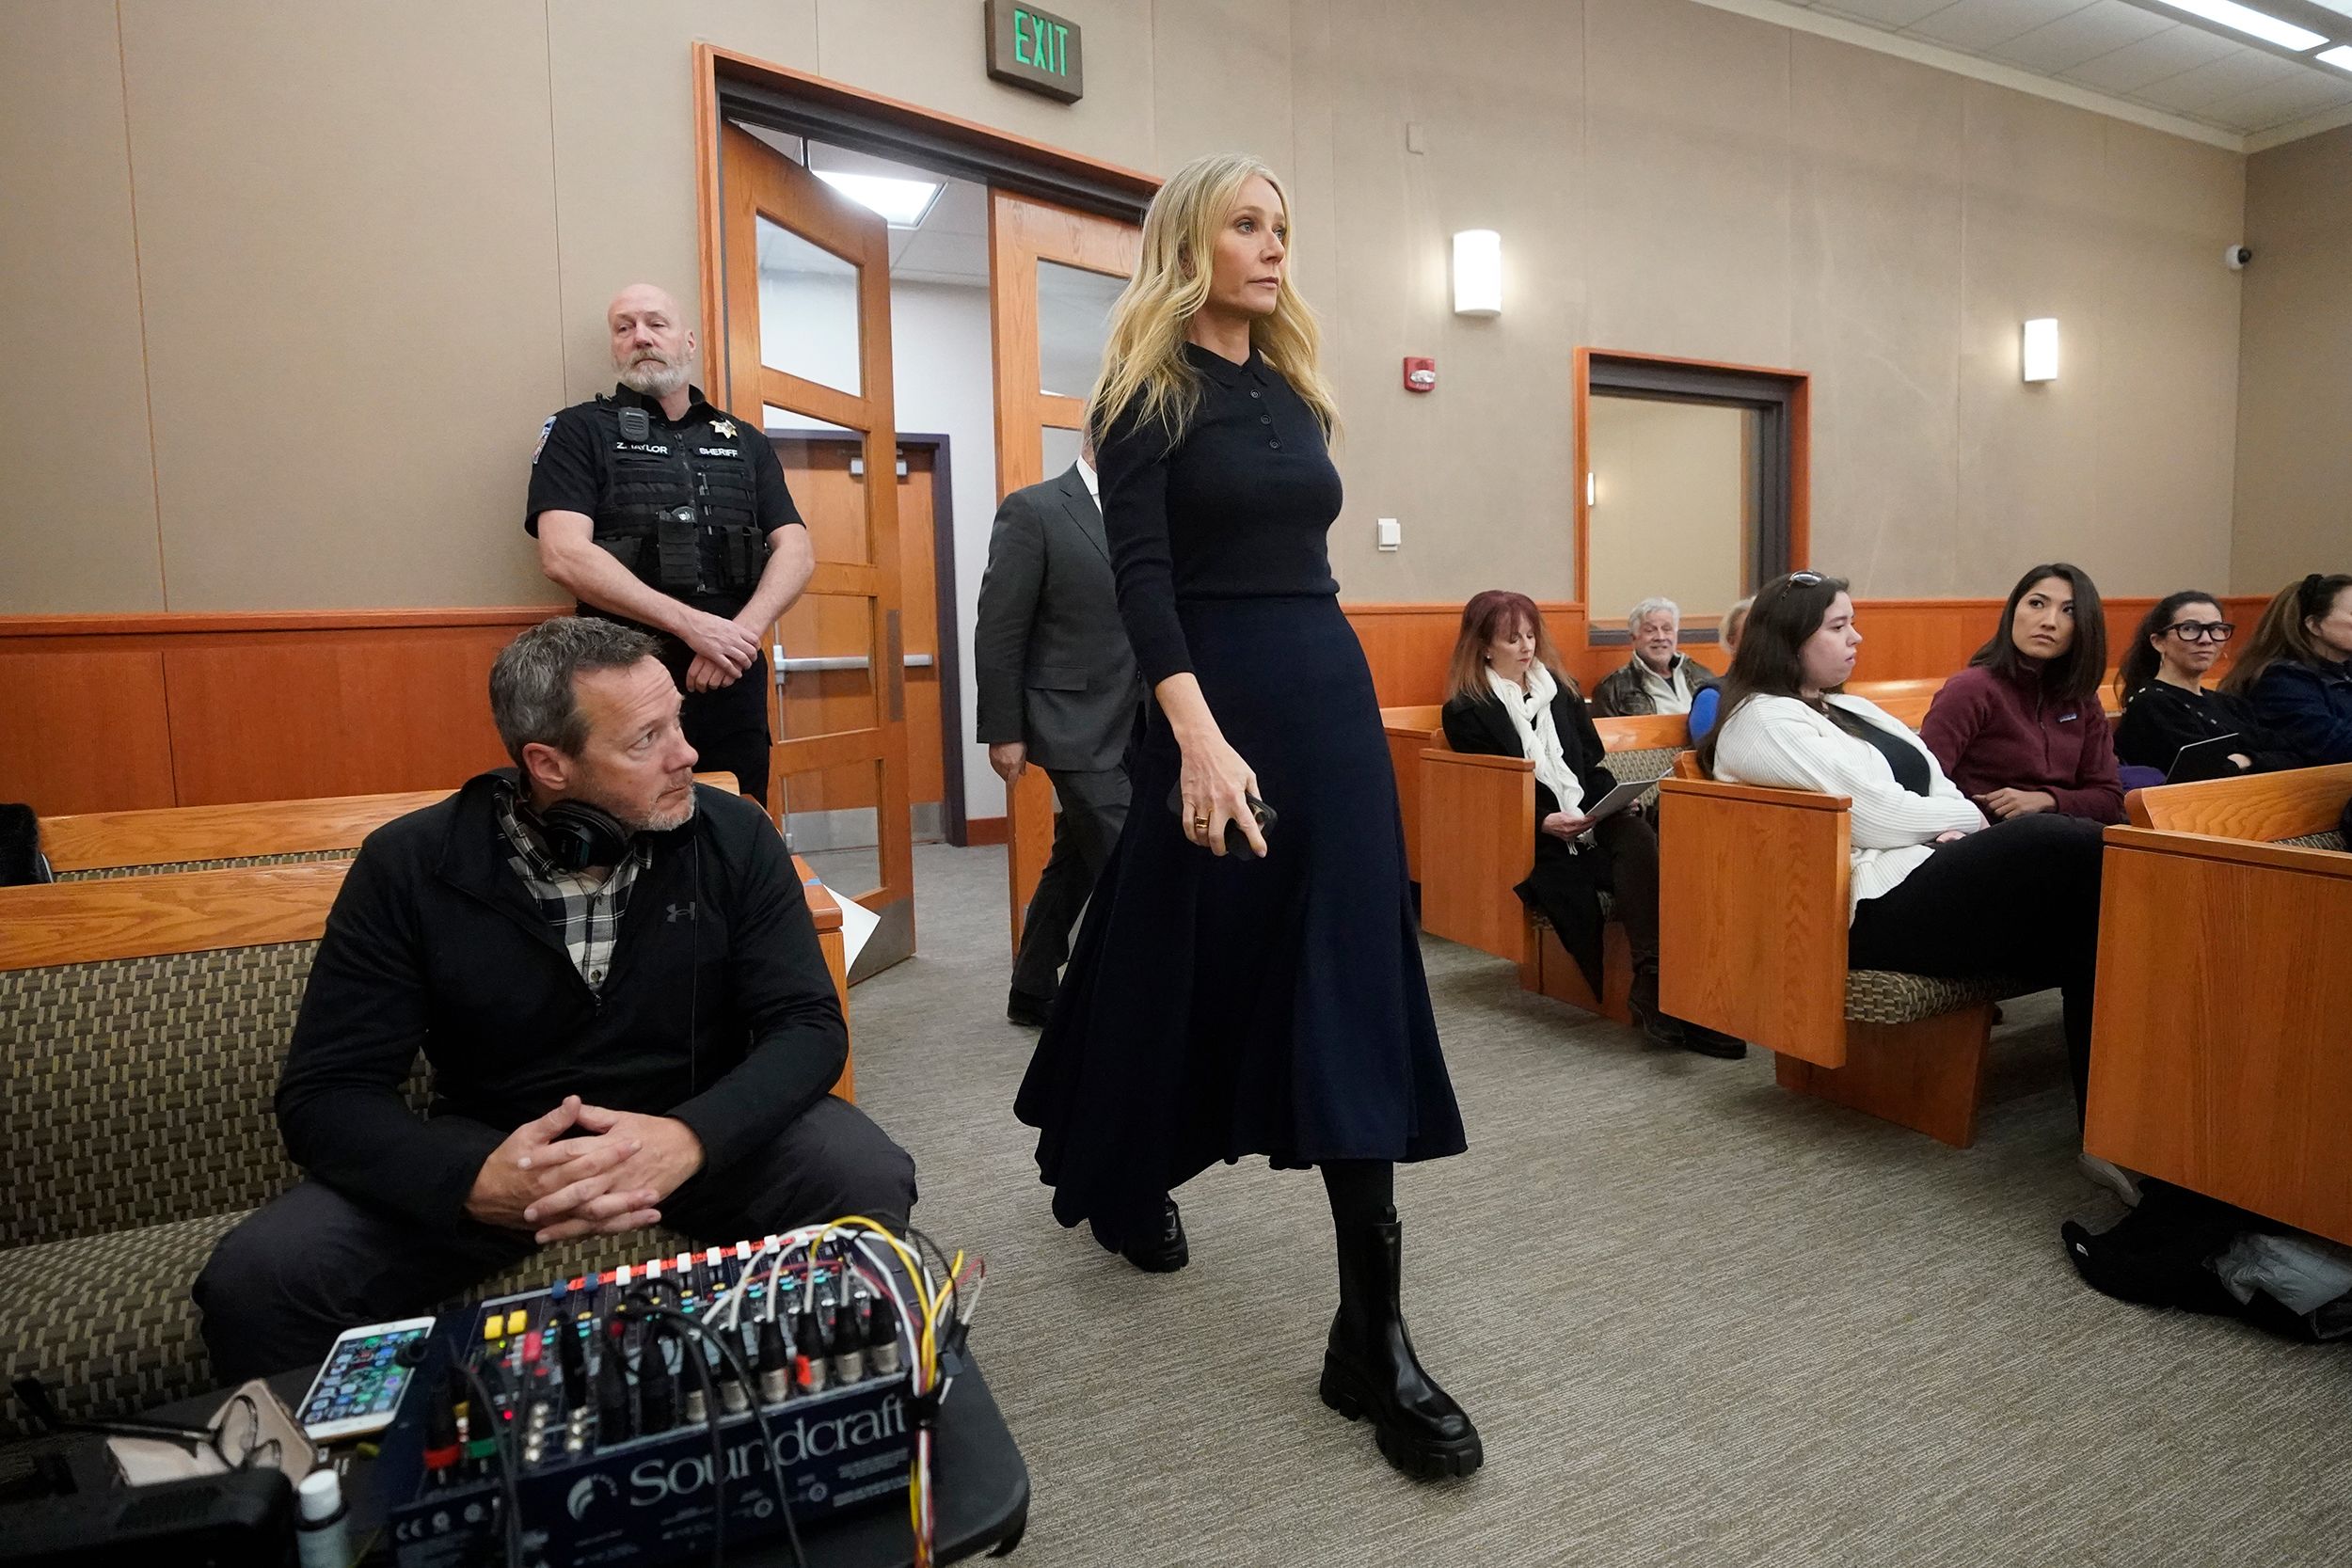 Gwyneth Paltrow takes the stand in ski collision trial: 'I did not